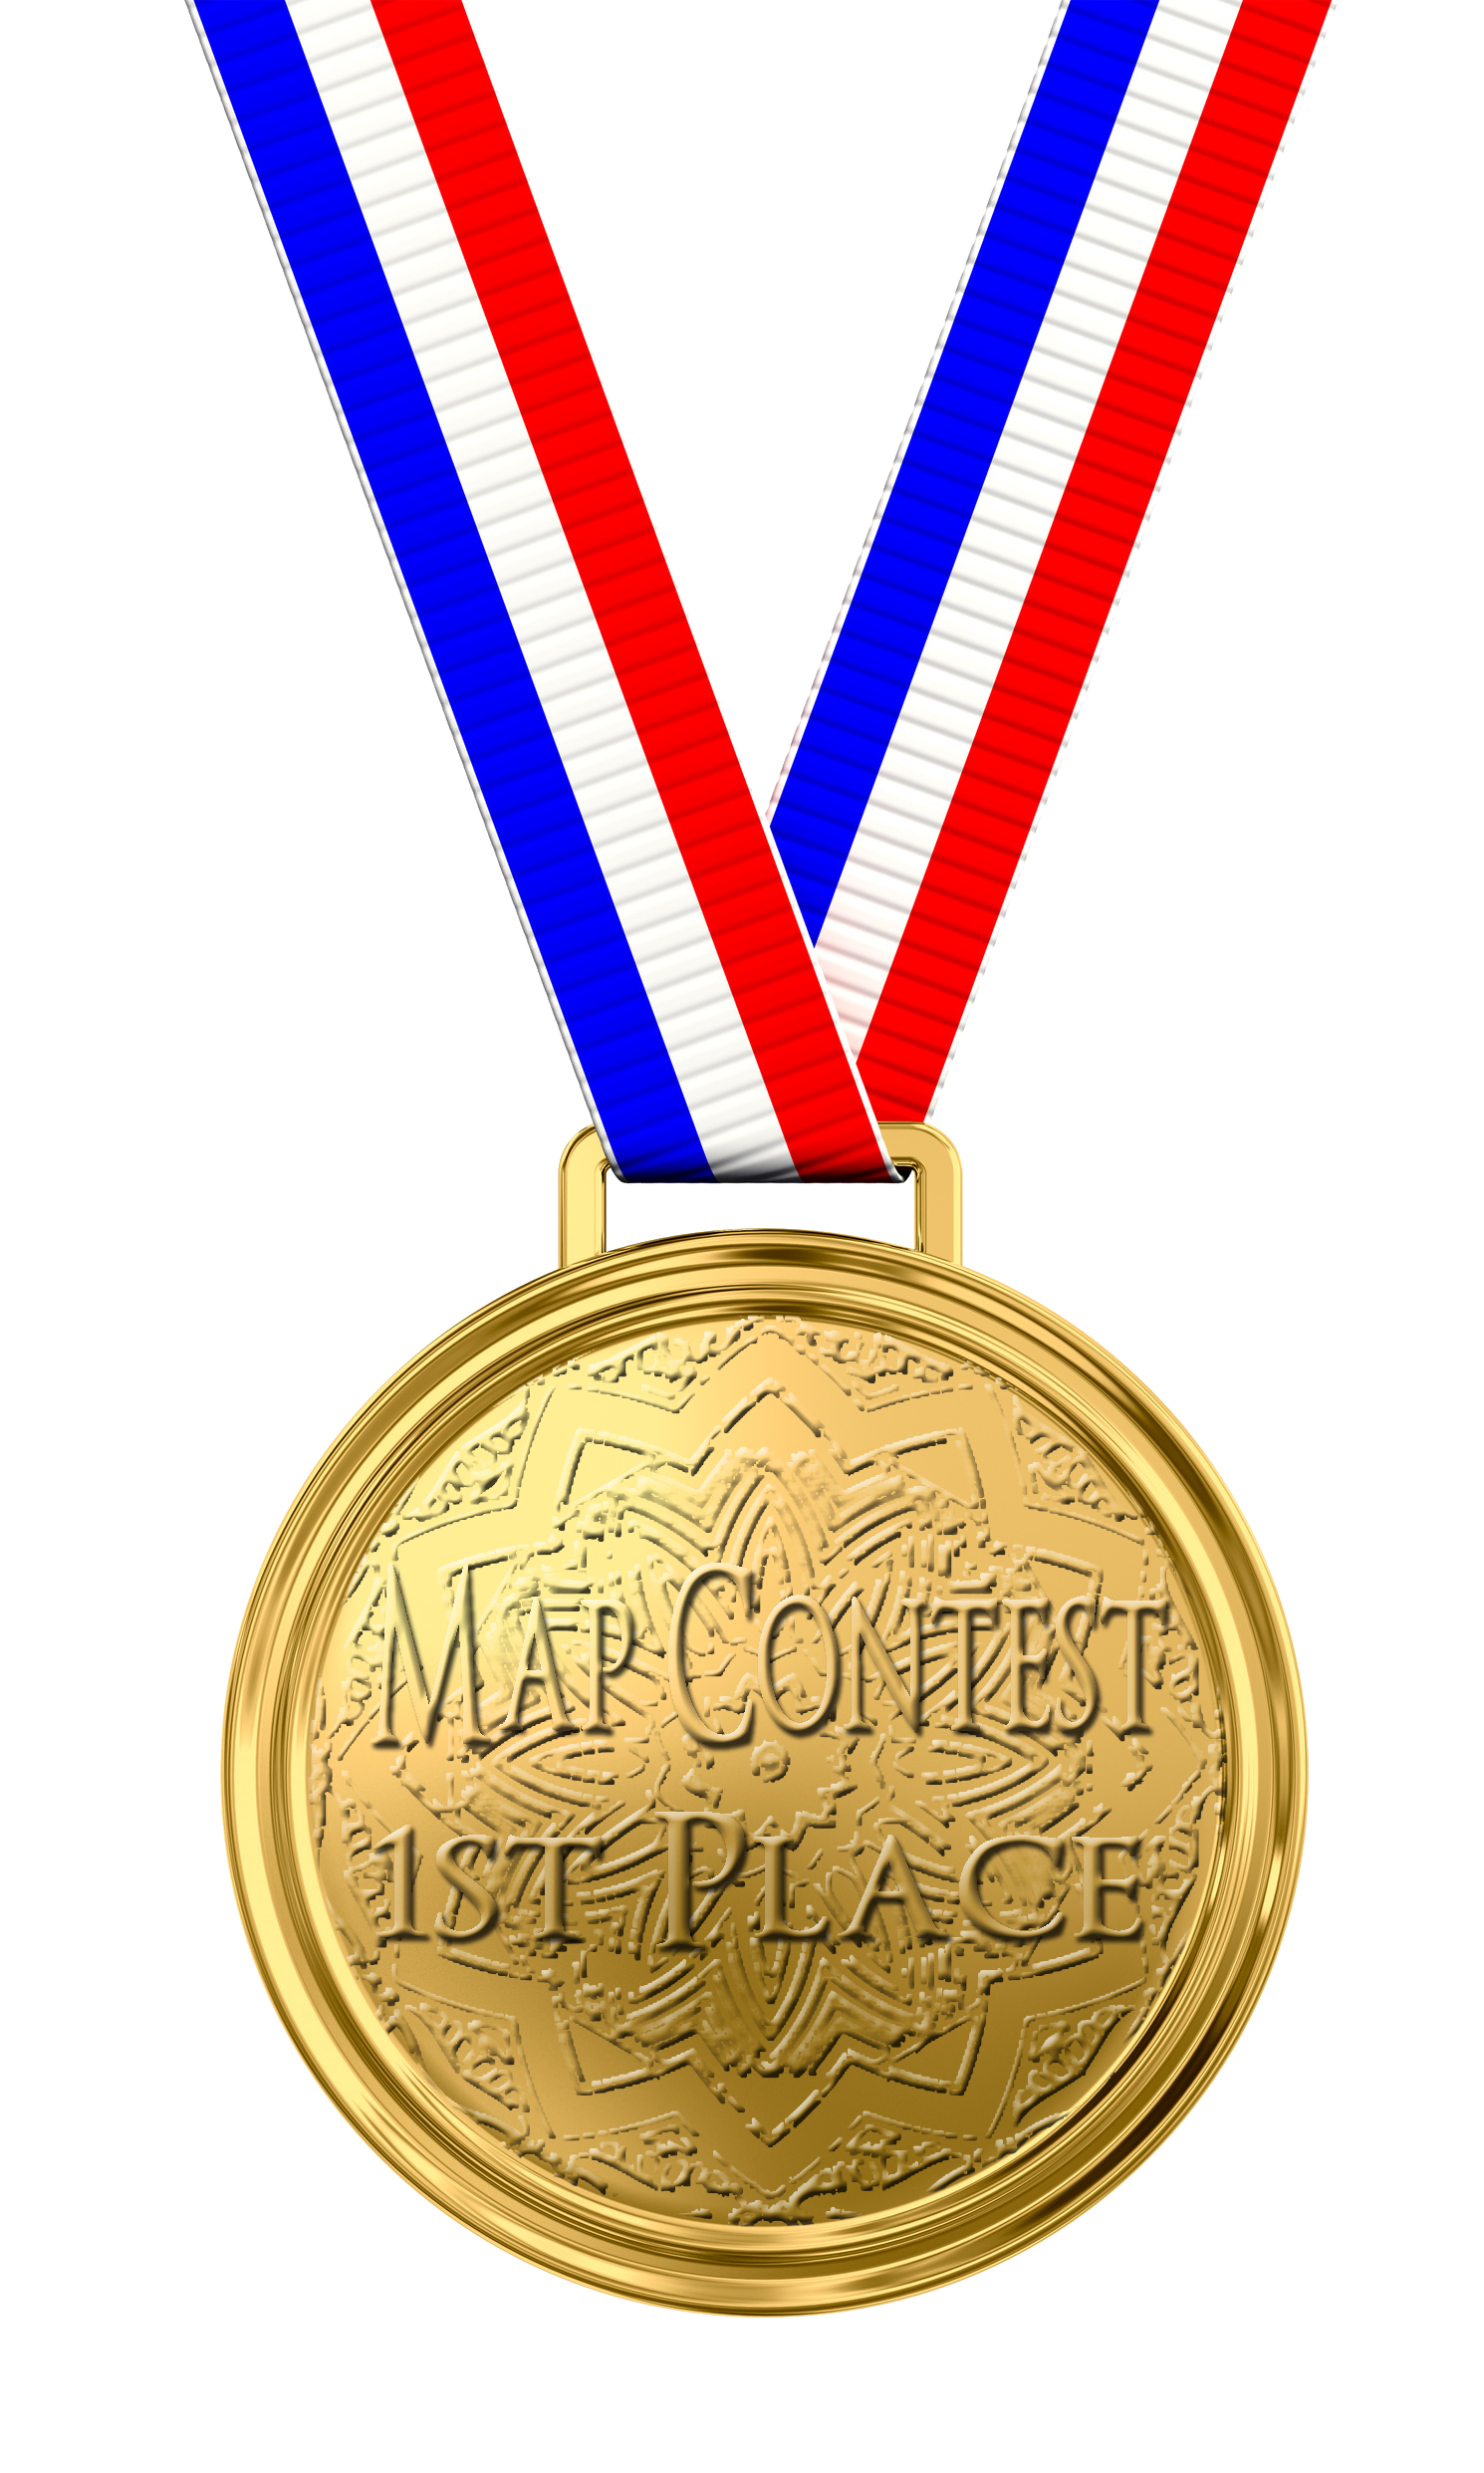 Medal Picture Png Image - Medal, Transparent background PNG HD thumbnail